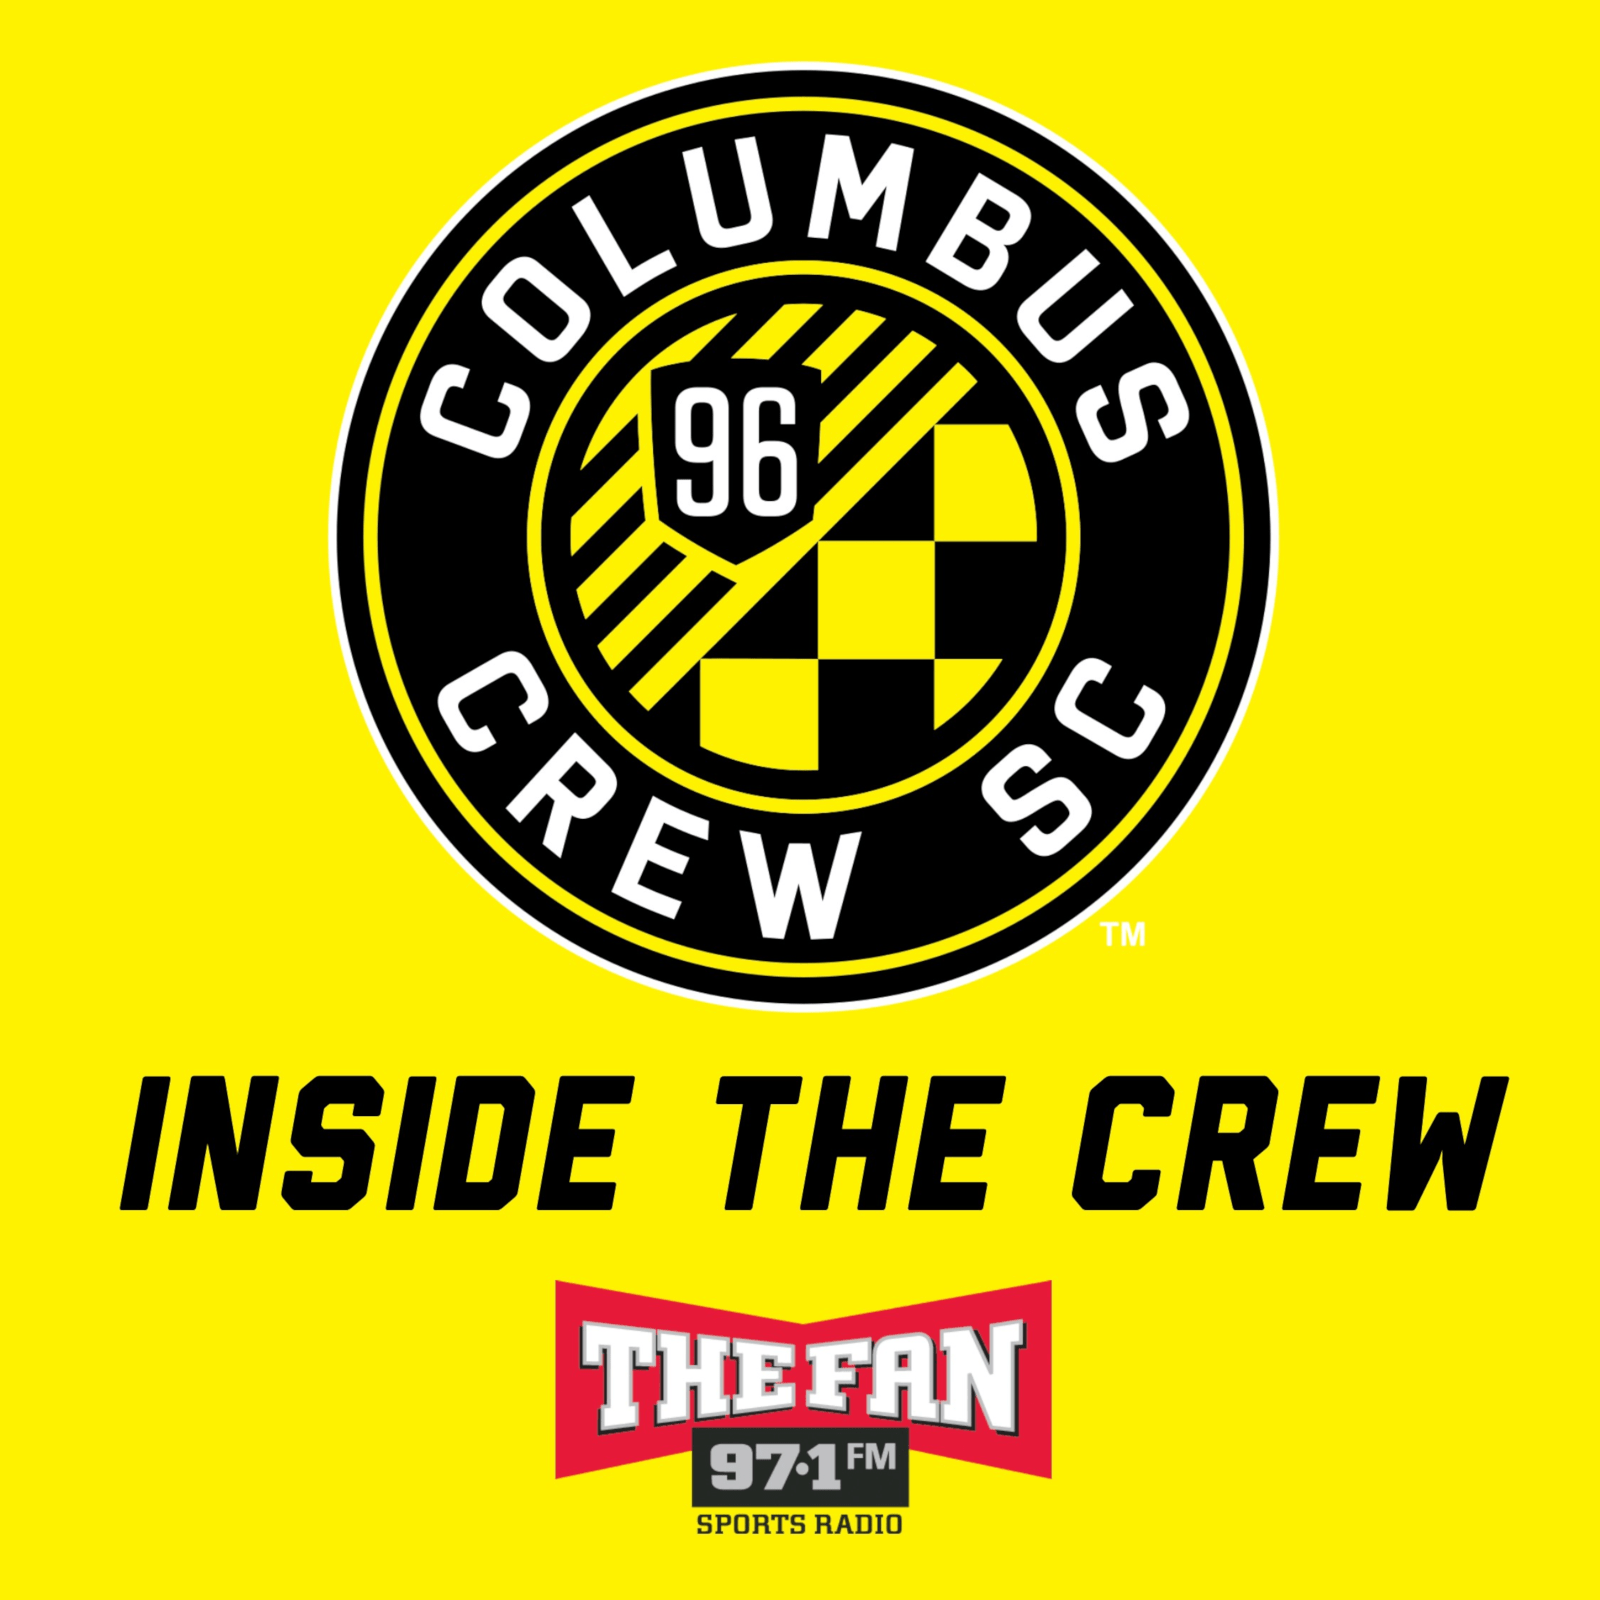 The Crew on X: They're on 𝐨𝐮𝐫 side. Welcome to the #Crew96,  @nationwidekids & @Nationwide!  / X